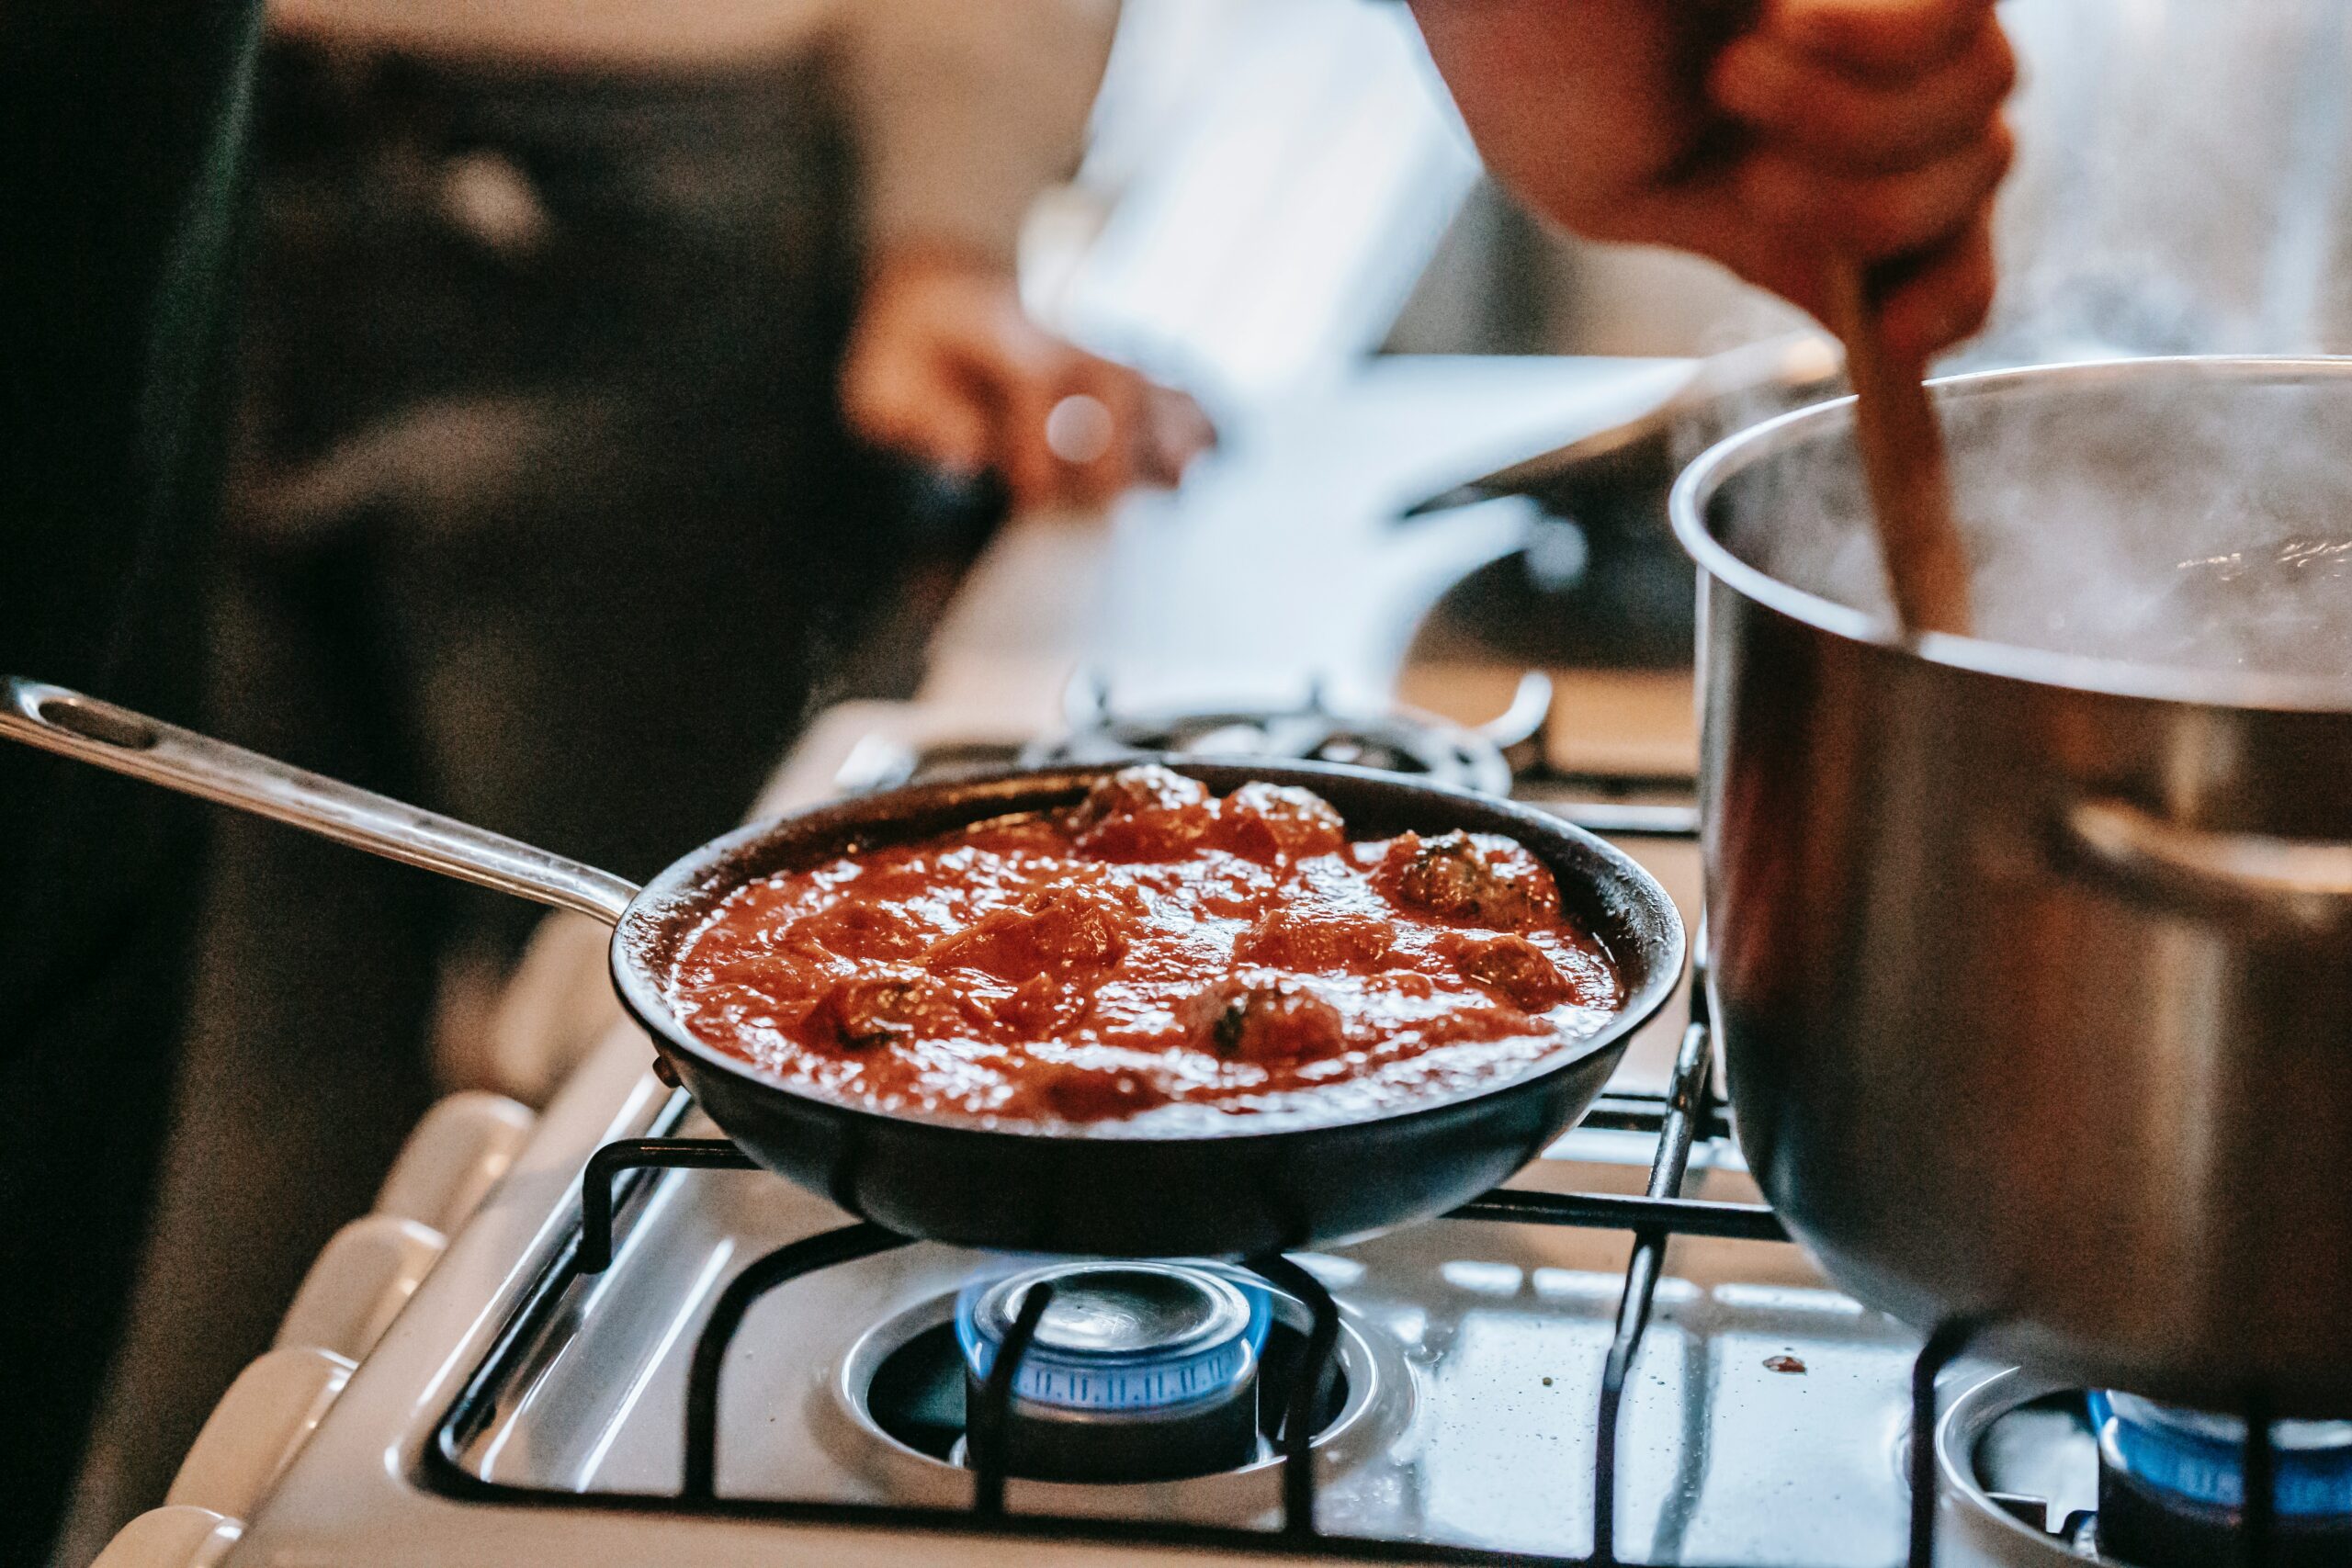 meatballs on a stove in the kitchen at a restaurant | meatballs Lone Tree